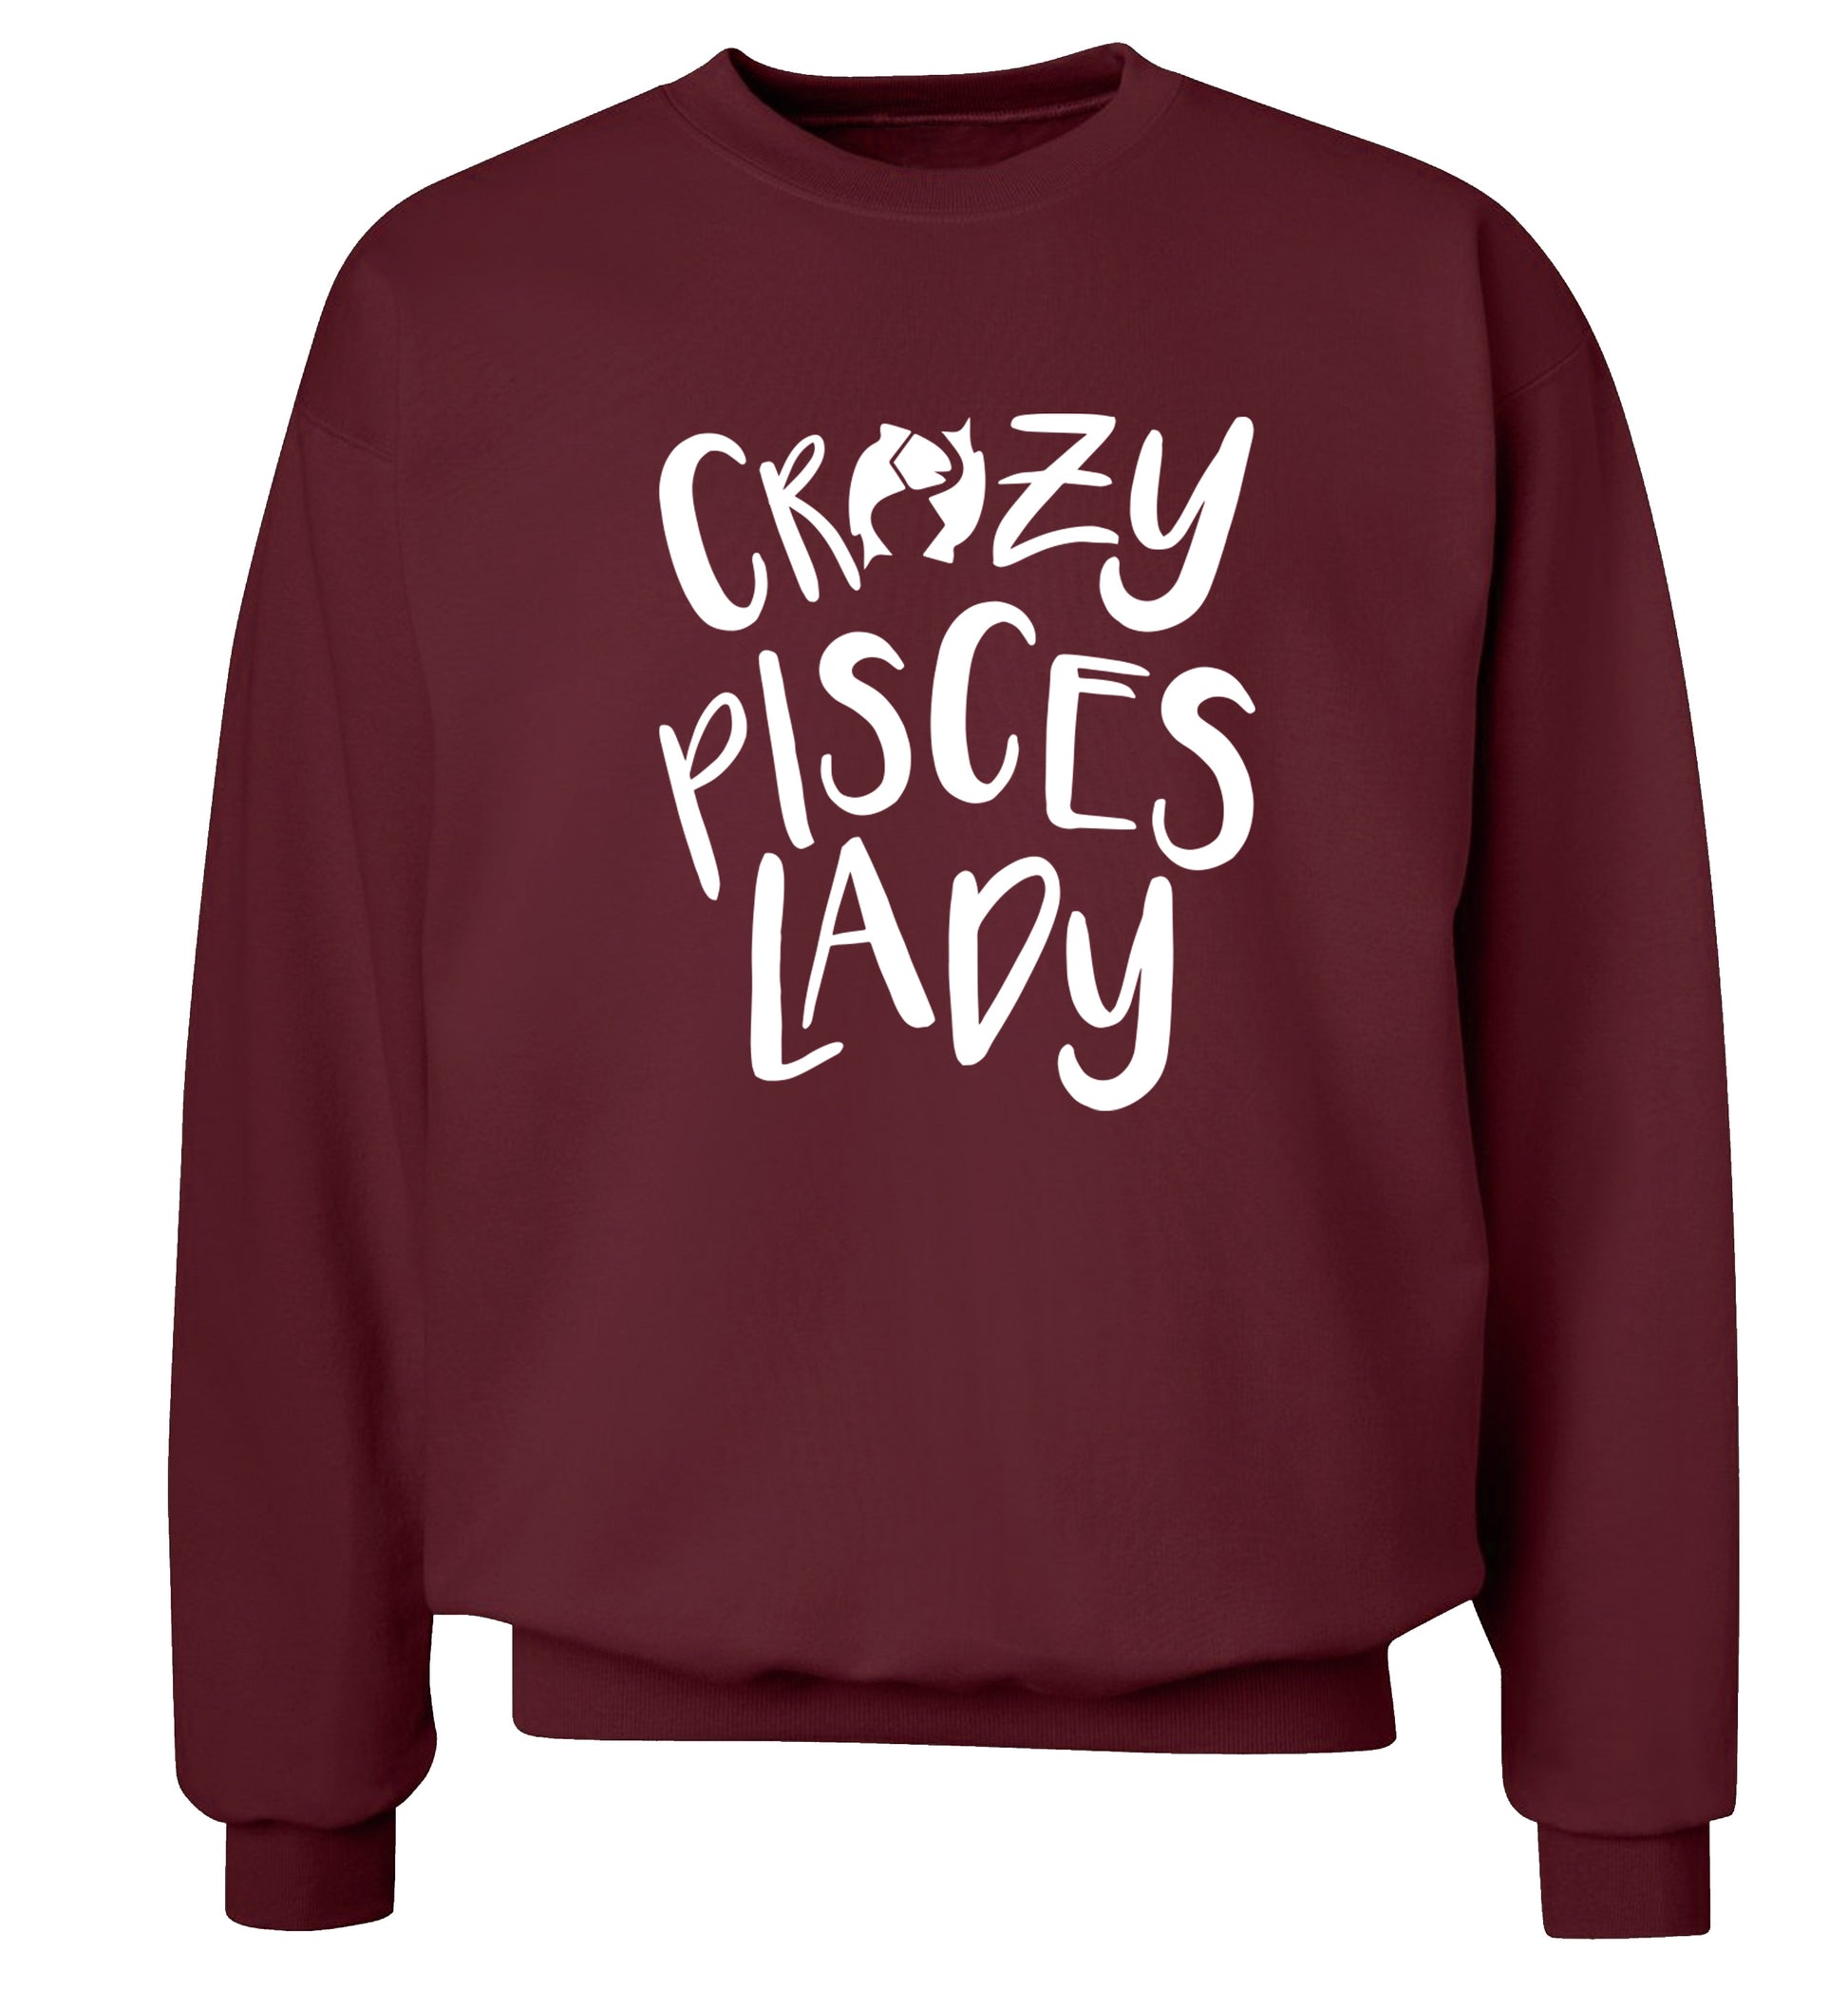 Crazy pisces Lady Adult's unisex maroon Sweater 2XL